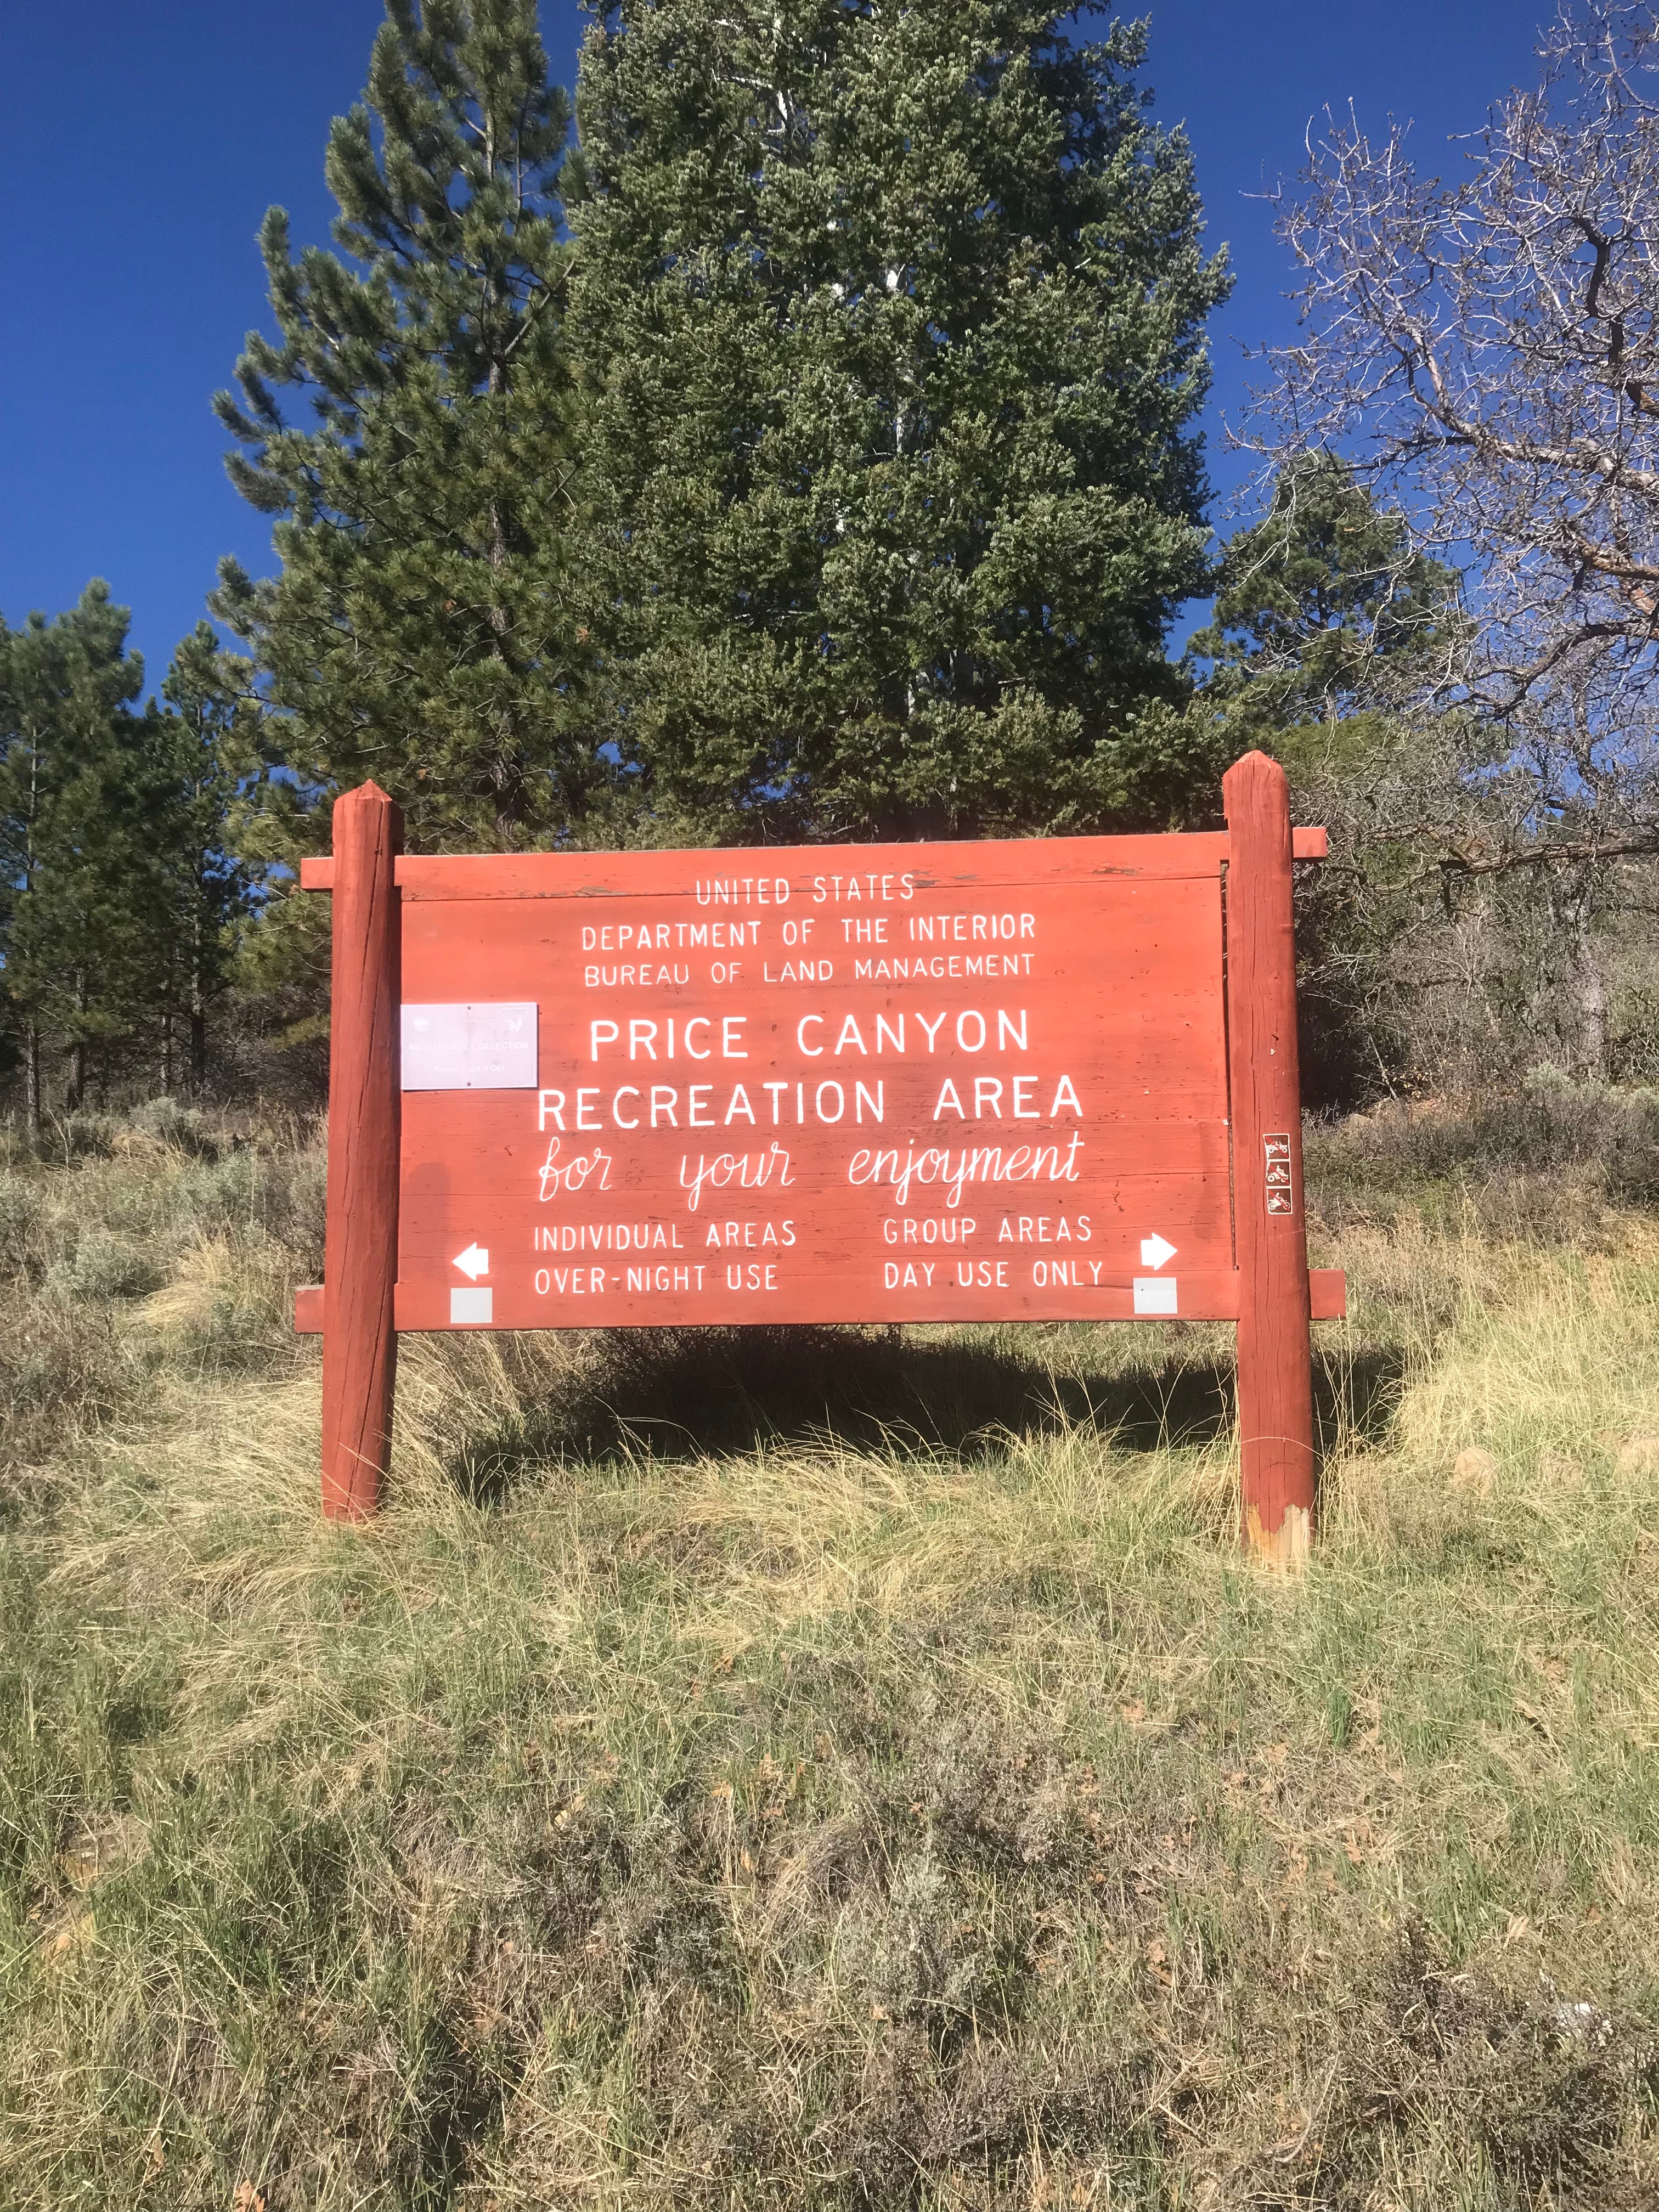 Entrance sign to the recreation area.